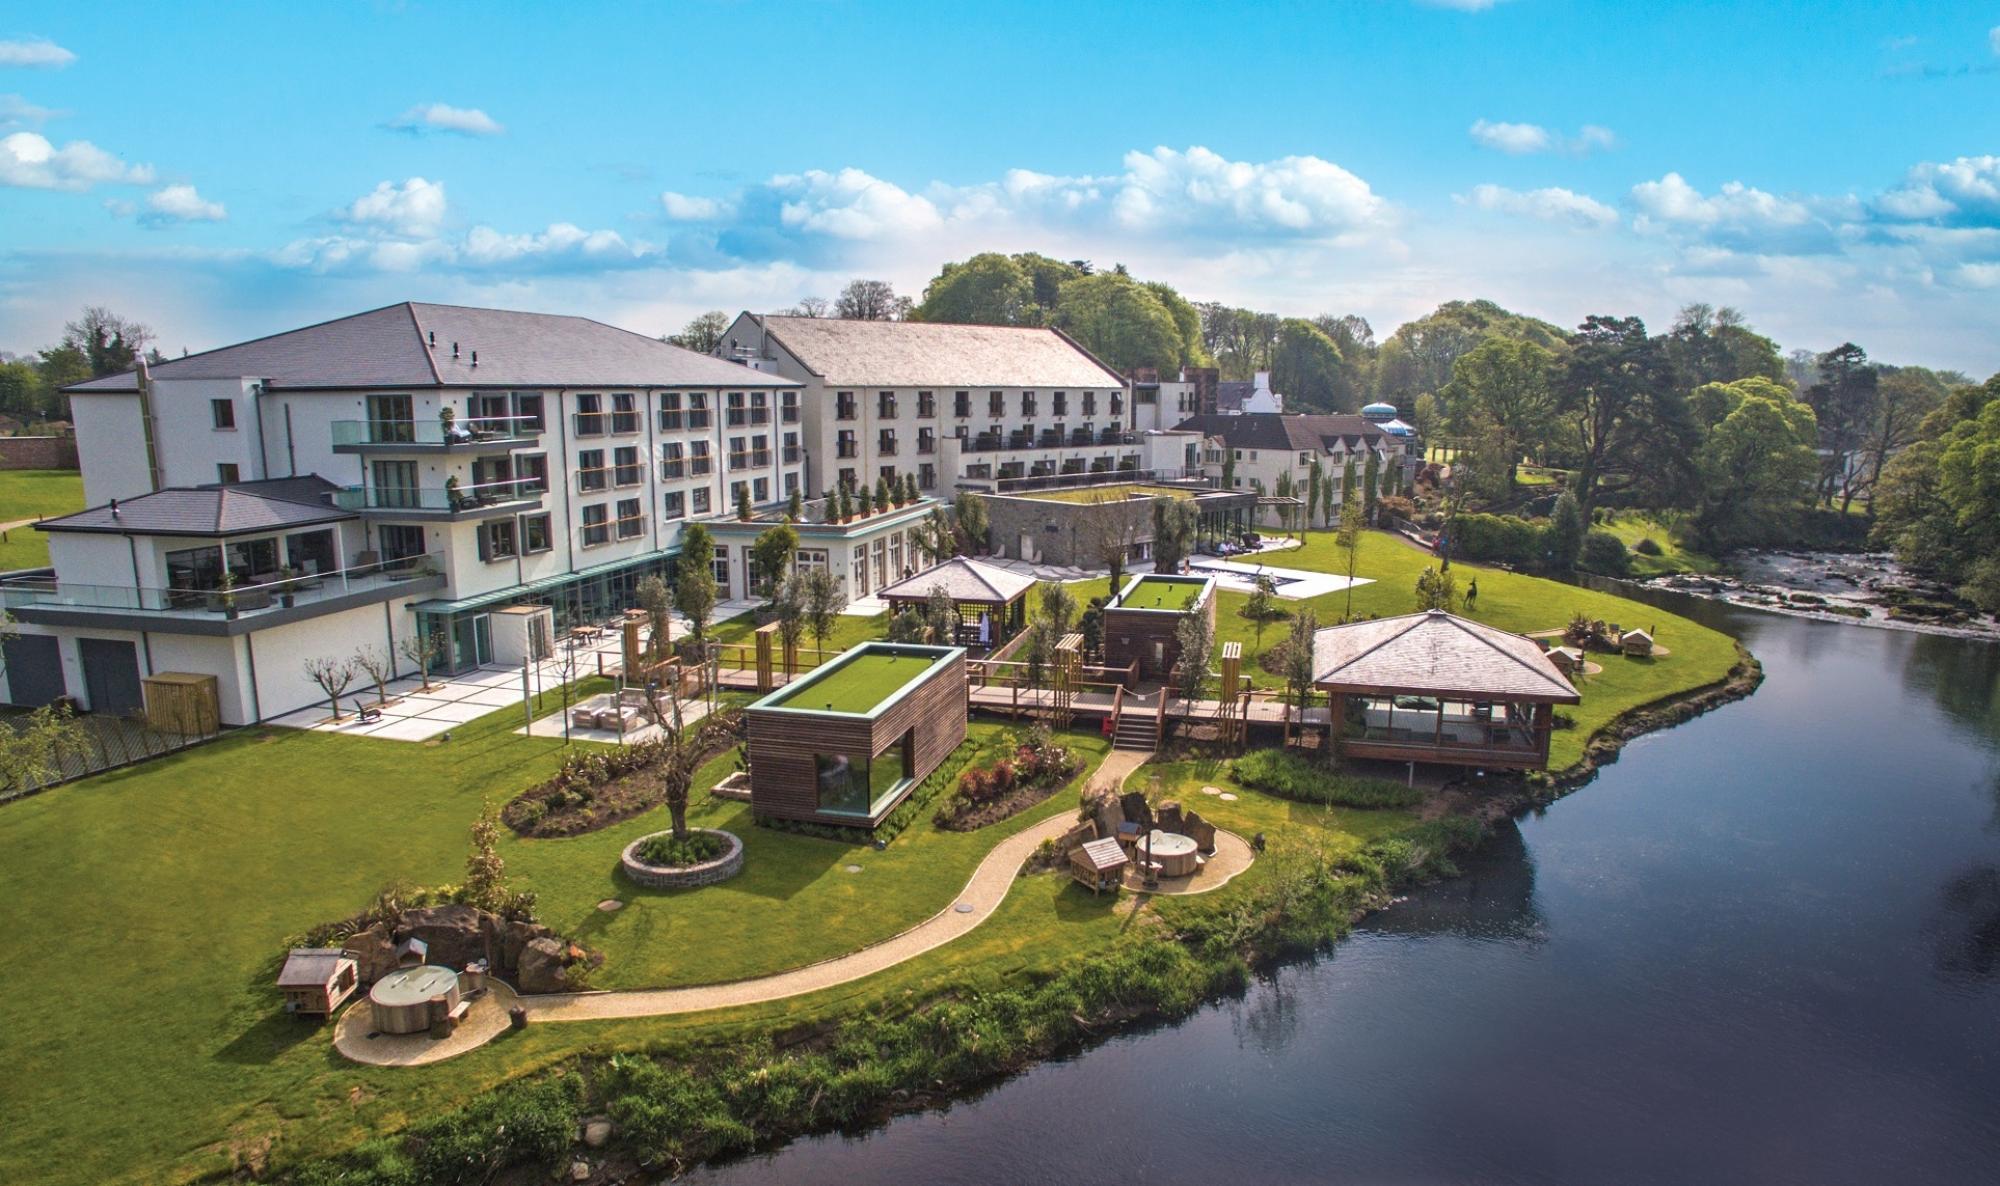 The Galgorm Resort  Spa's lovely hotel situated in brilliant Northern Ireland.